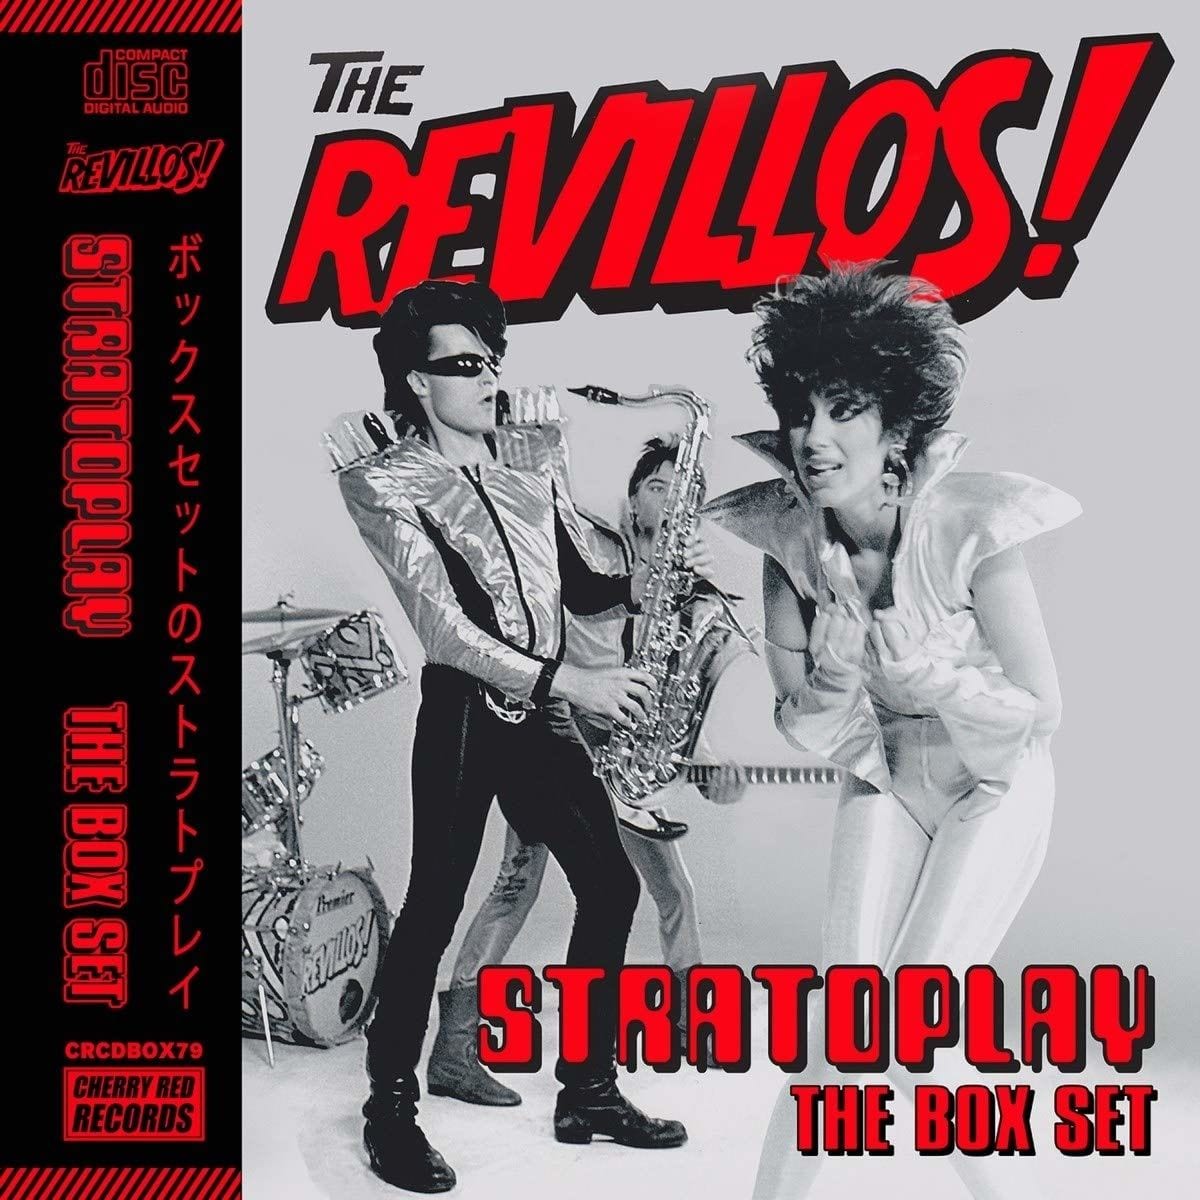 ‘Stratoplay’ Revels in the Delicious New Wave of the Revillos